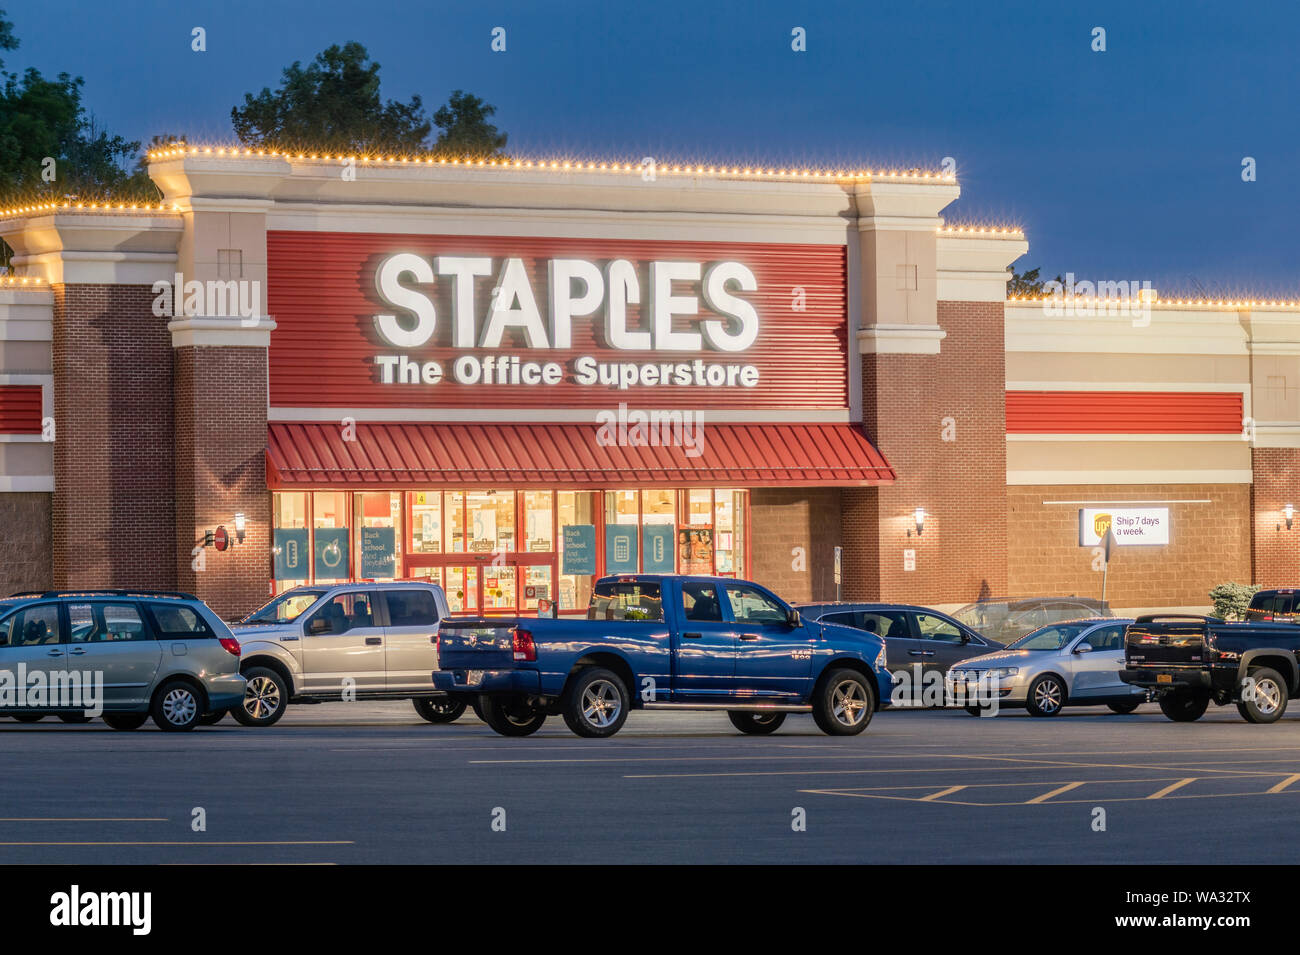 NEW HARTFORD, NEW YORK - AUG 16, 2019: Staples Location. Staples is a multinational retain office supply chain with over 1500 location in the US. Stock Photo